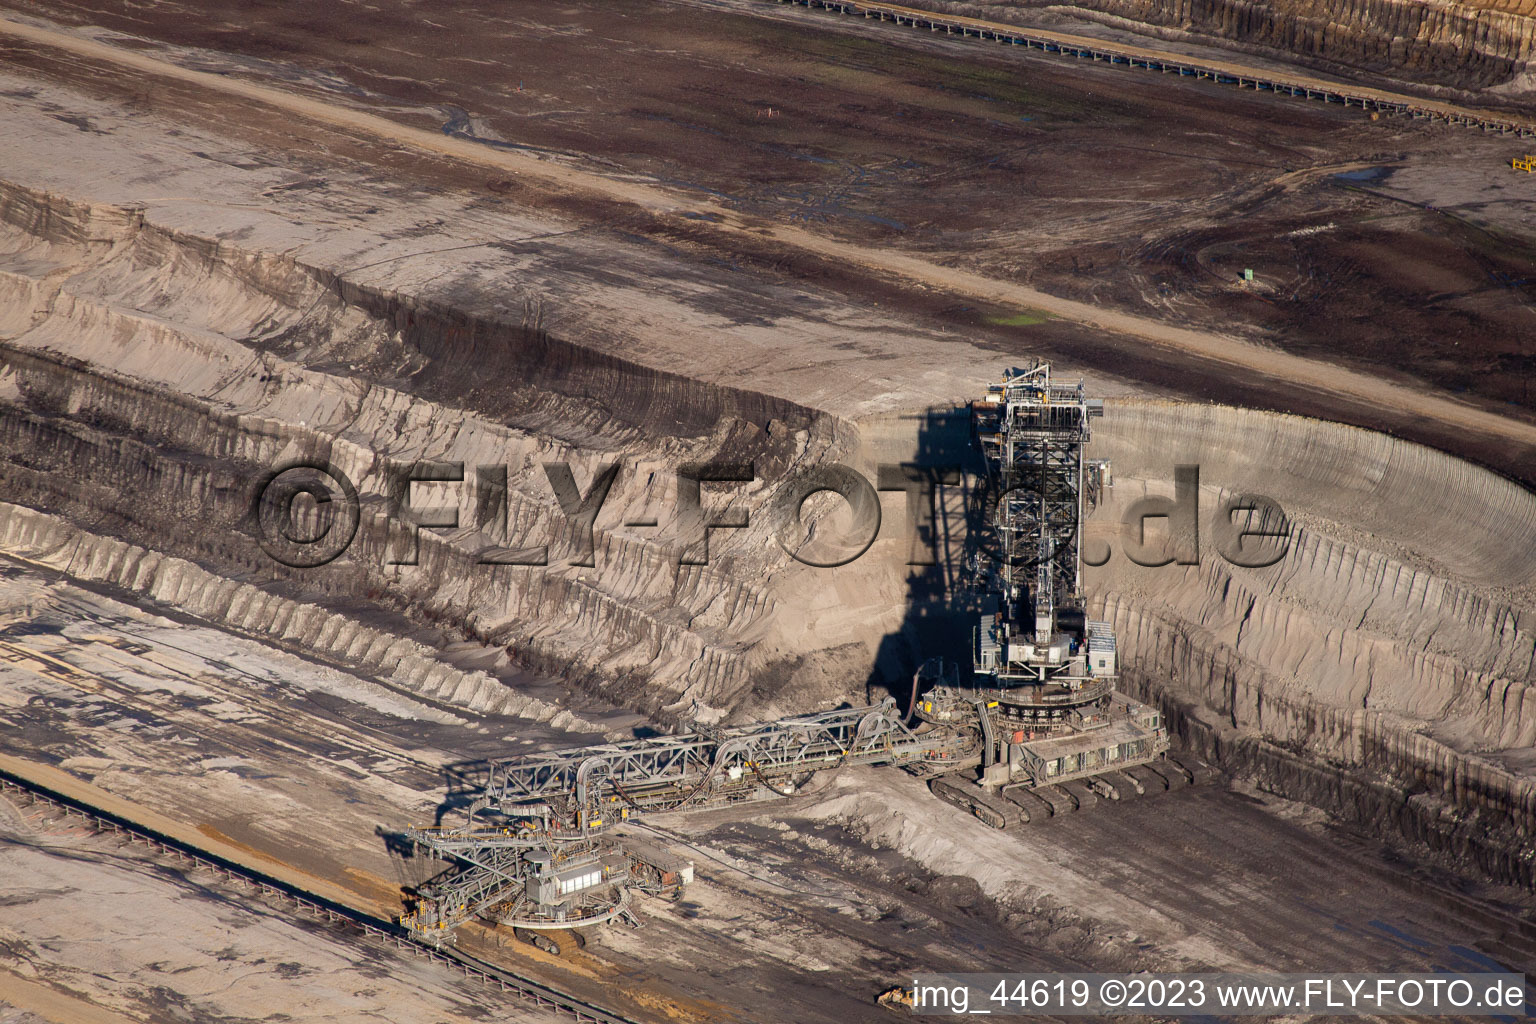 Opencast brown coal mining in Inden in the state North Rhine-Westphalia, Germany from the drone perspective